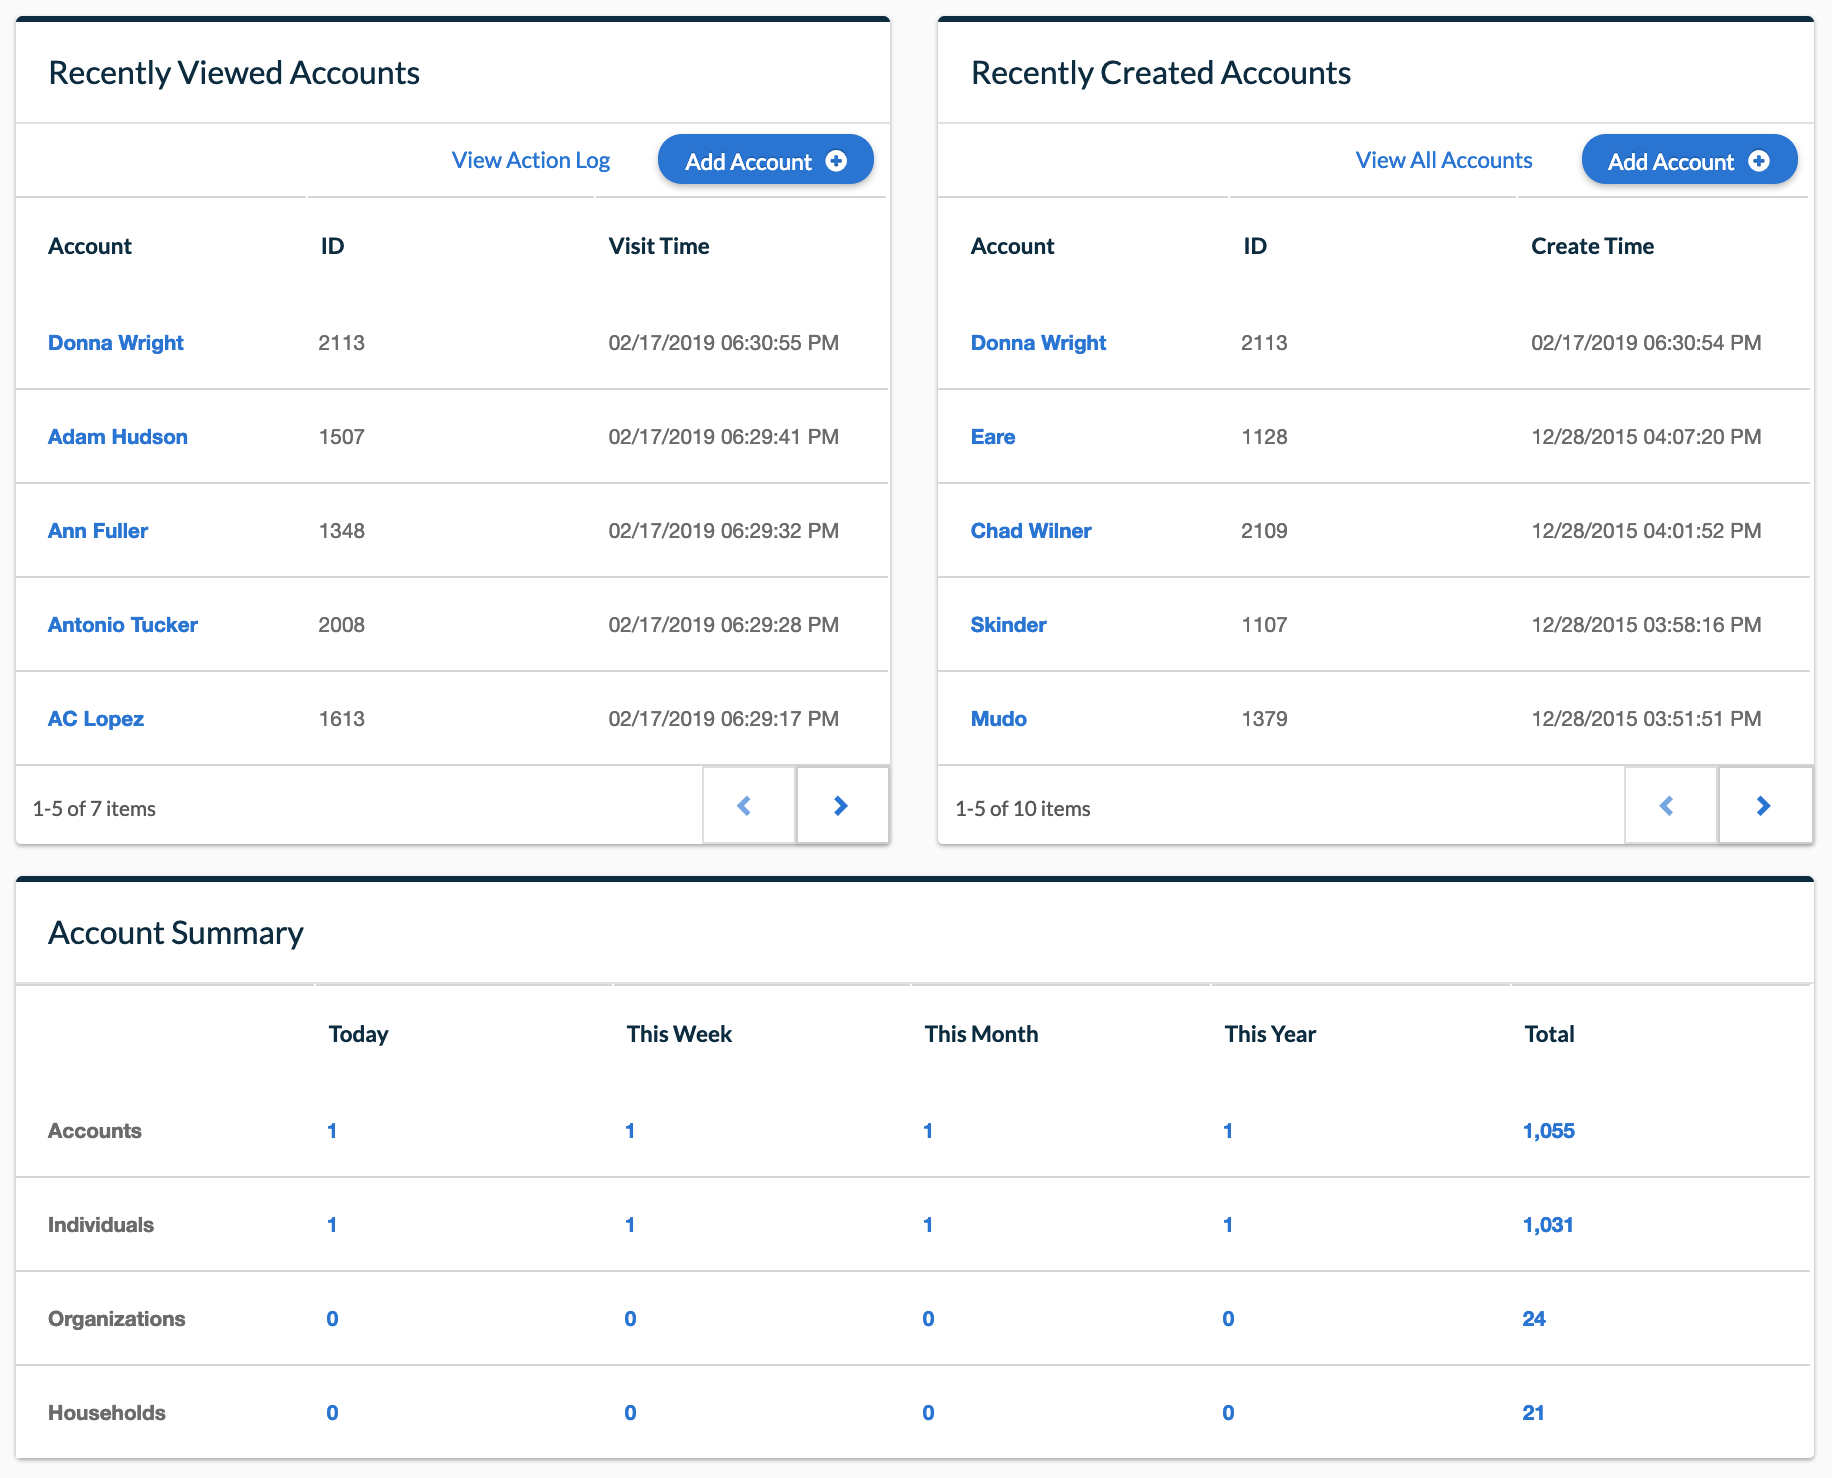 NeonCRM’s Recently Viewed Accounts, Recently Created Accounts, and Account Summary widgets displaying account overview data.